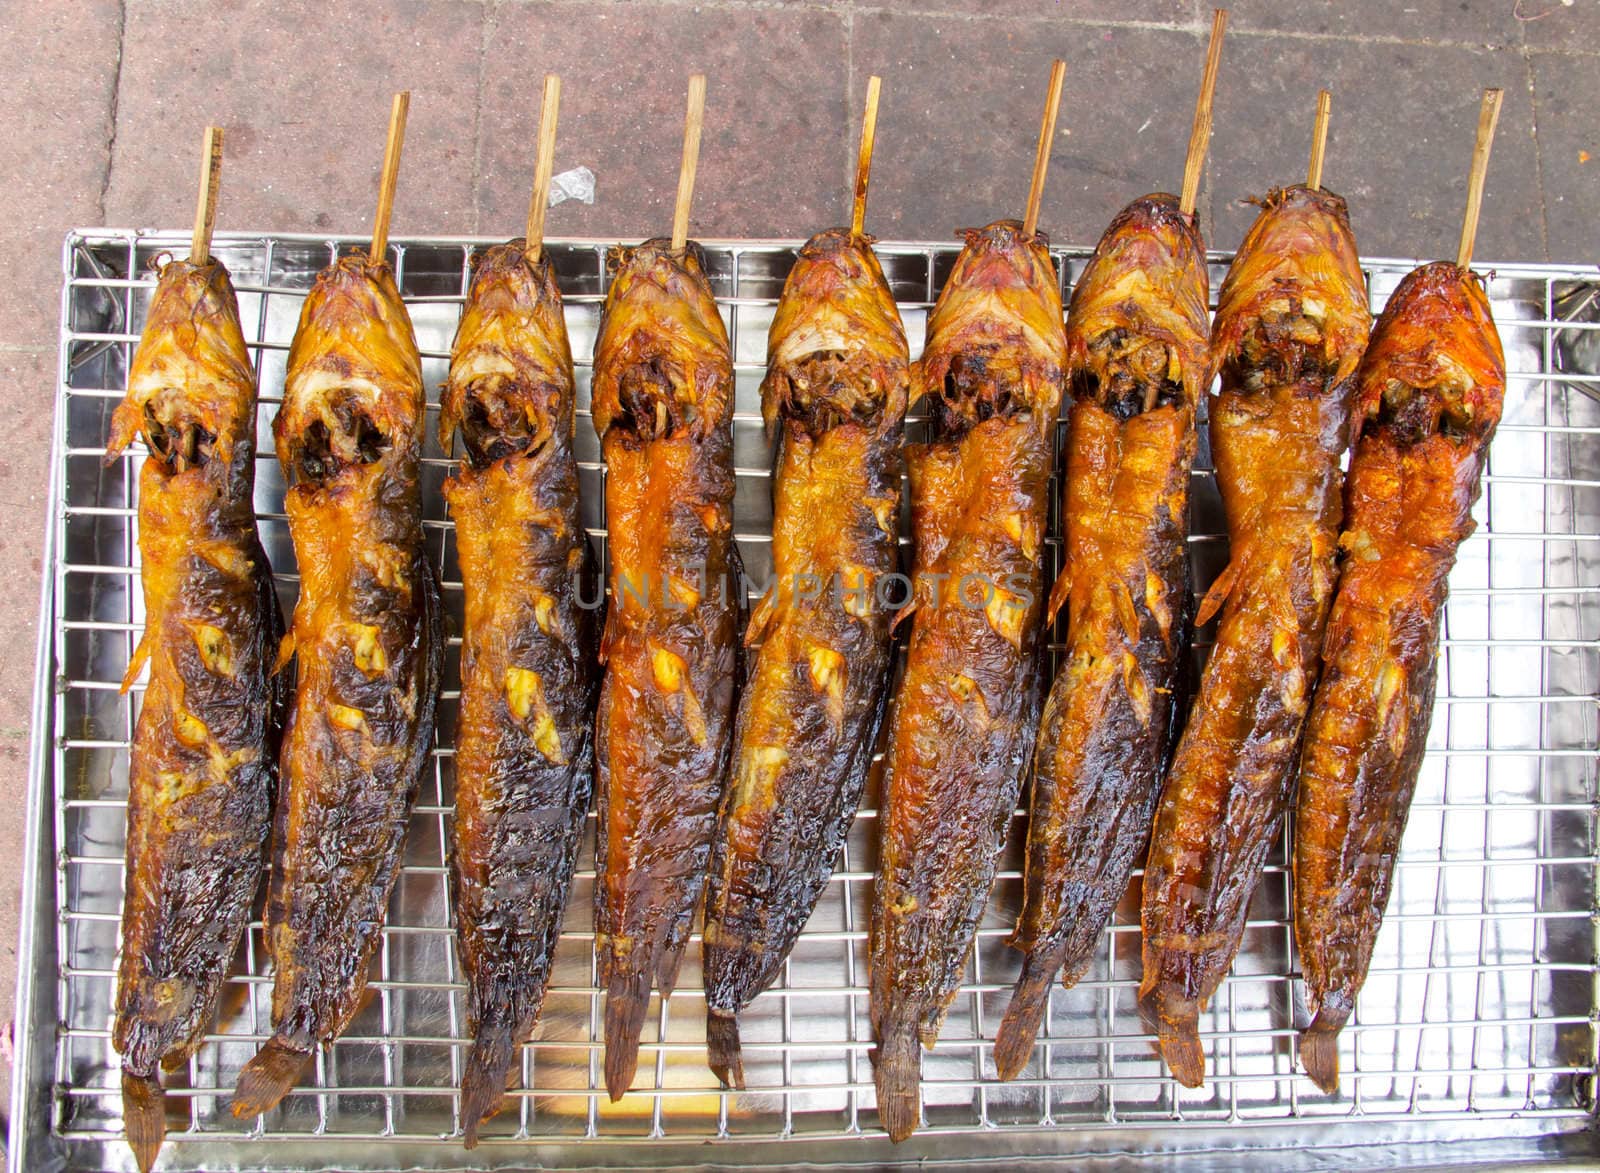 Some grill catfish BBQ on street food in Thailand.